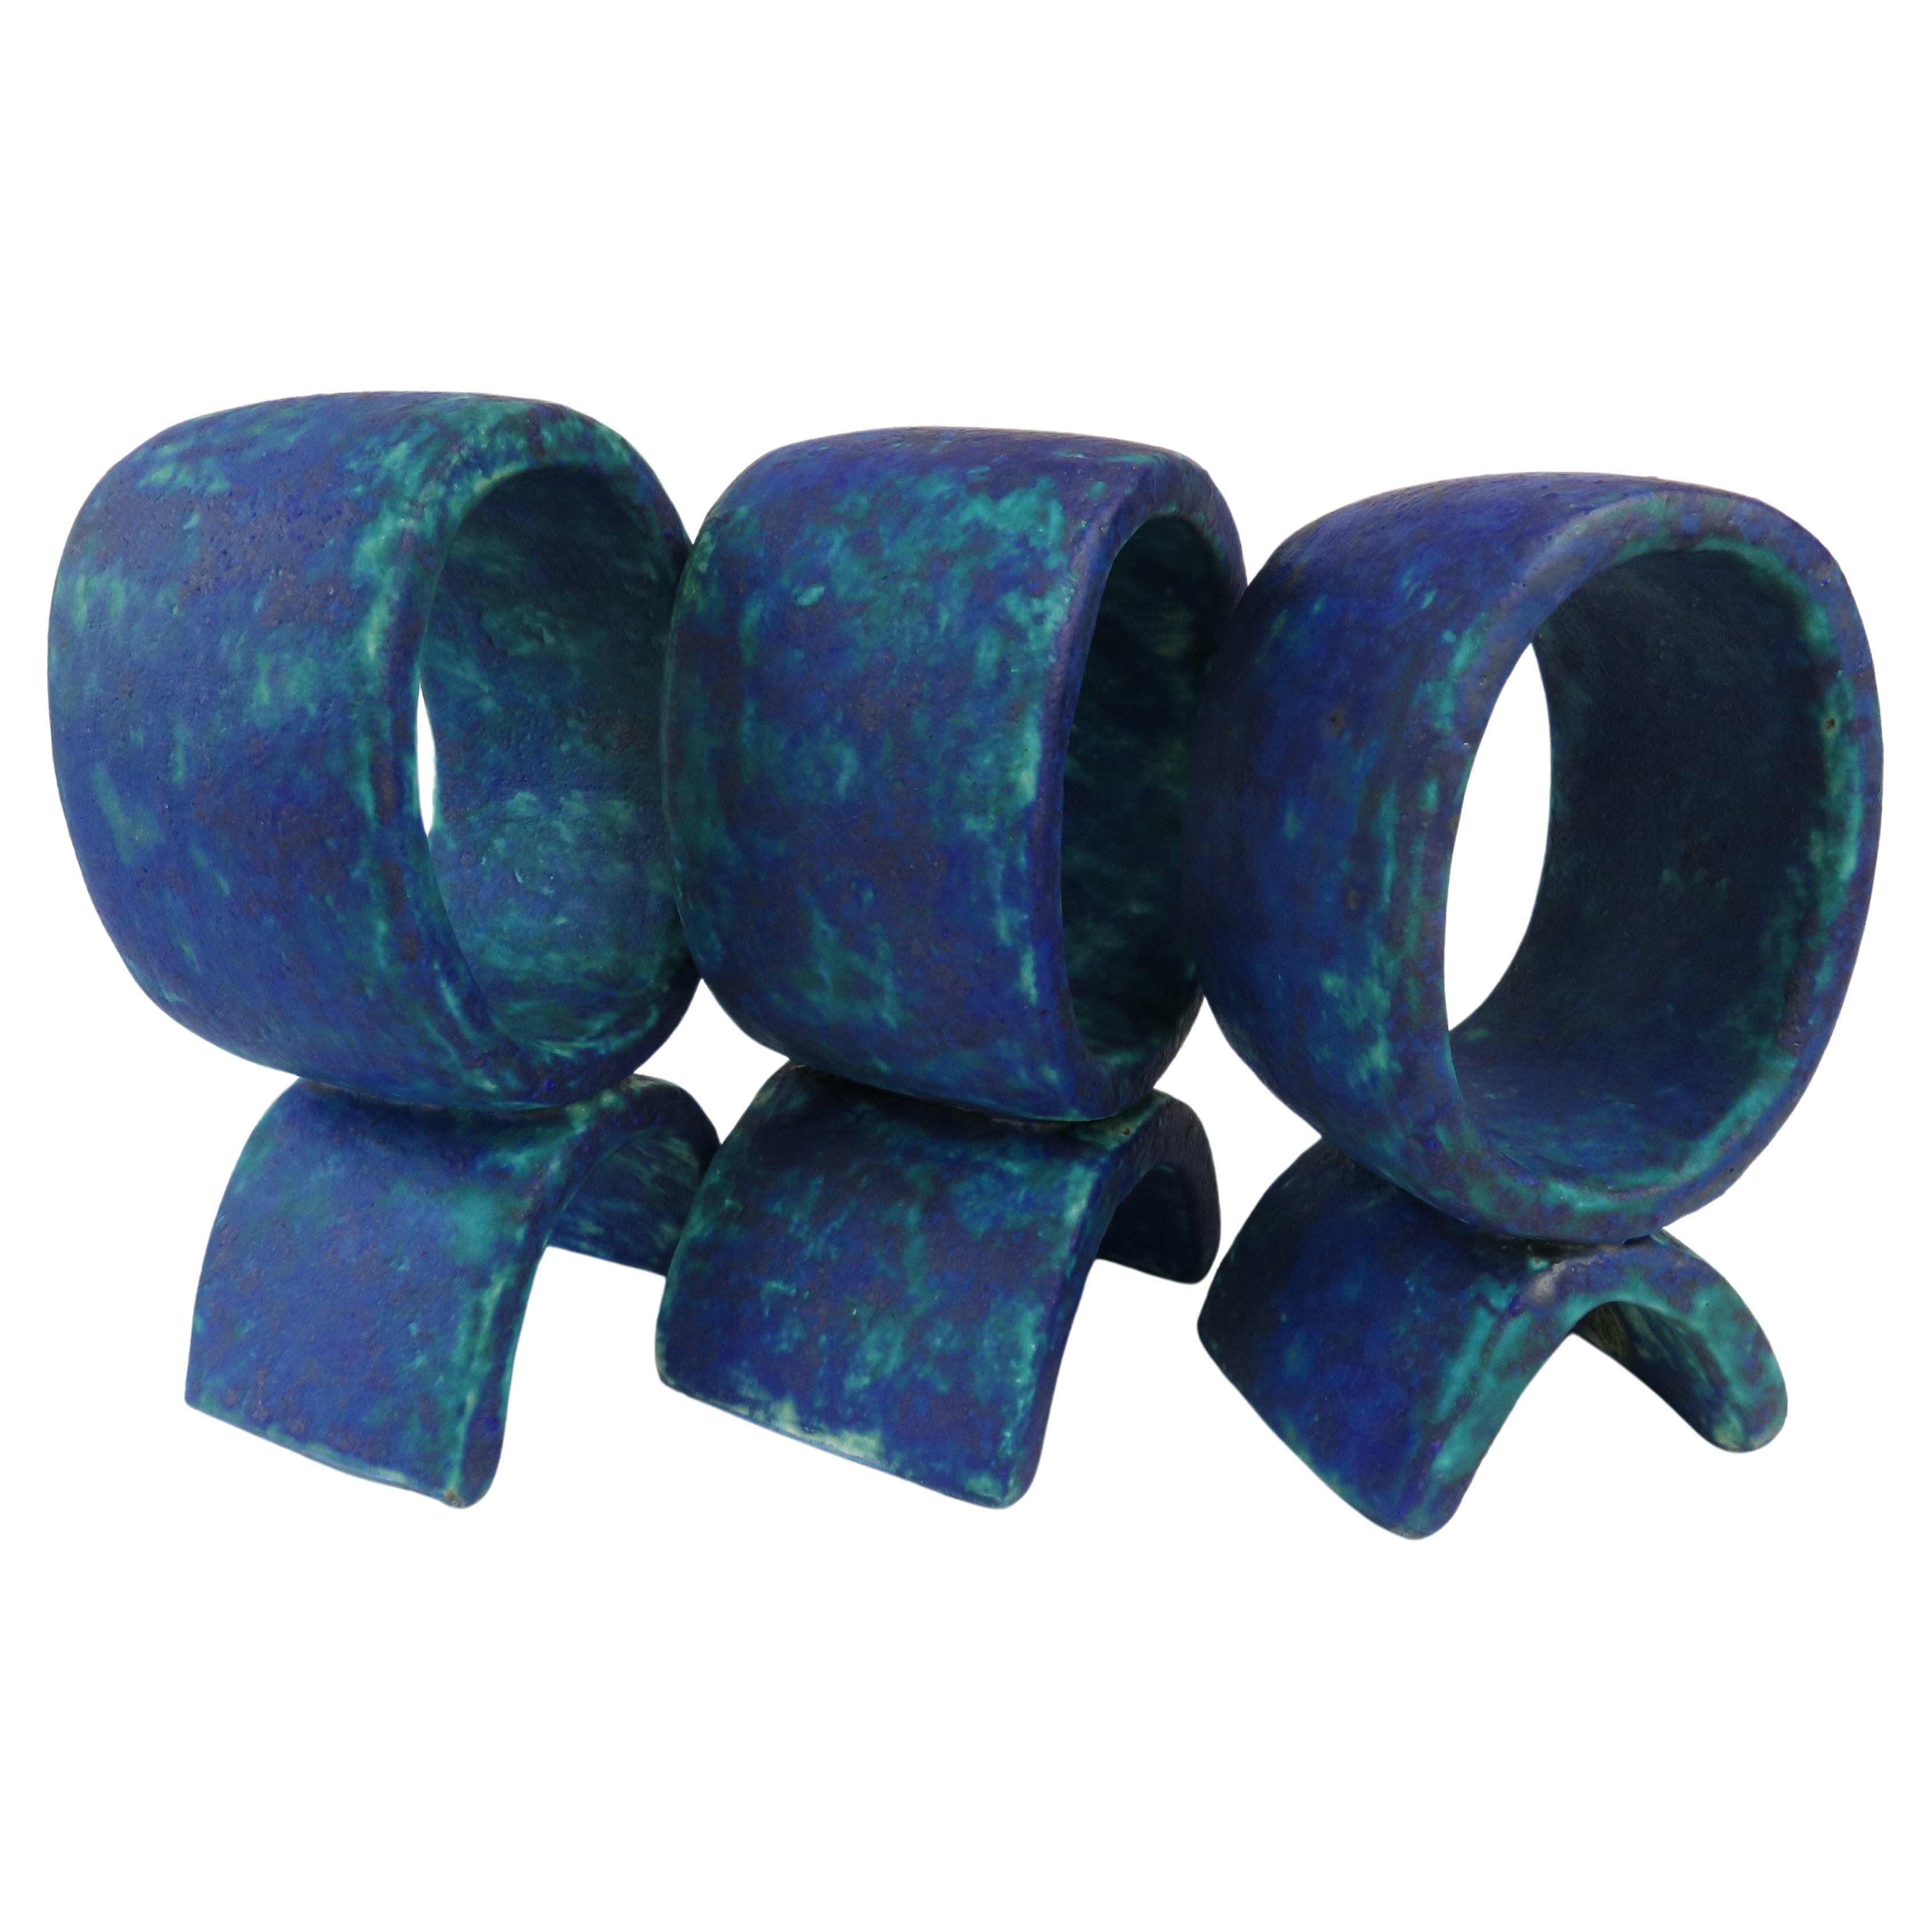 Mottled Turquoise and Deep Blue, 3 Ceramic Totems, Single Rings on Curved Legs For Sale